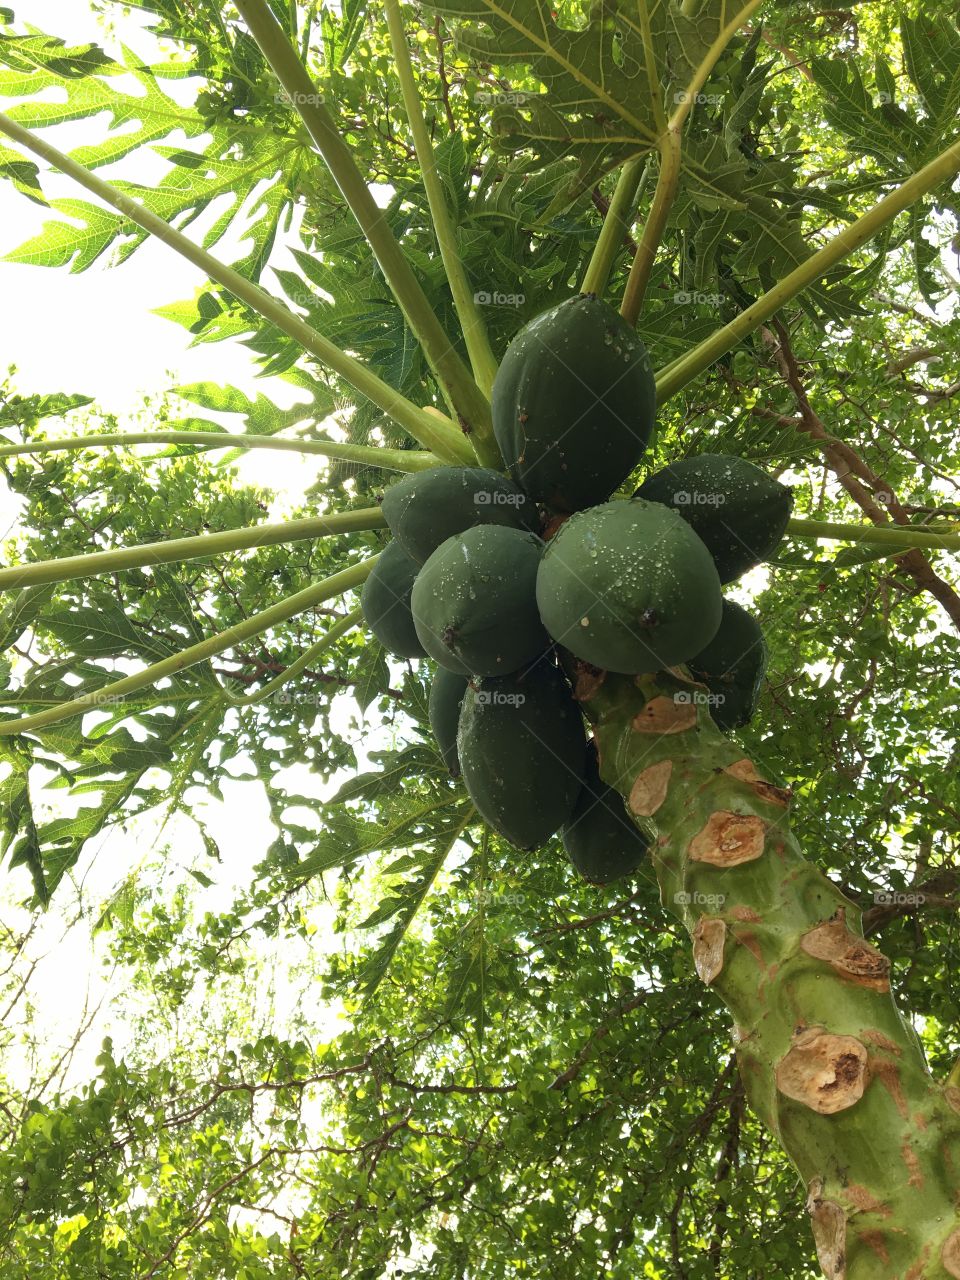 A tropical papaya tree, taken from a low angle. The fruit is still green. Fresh raindrops from a recent storm linger on the fruit. The sun shine lights up the greenery of the scene.